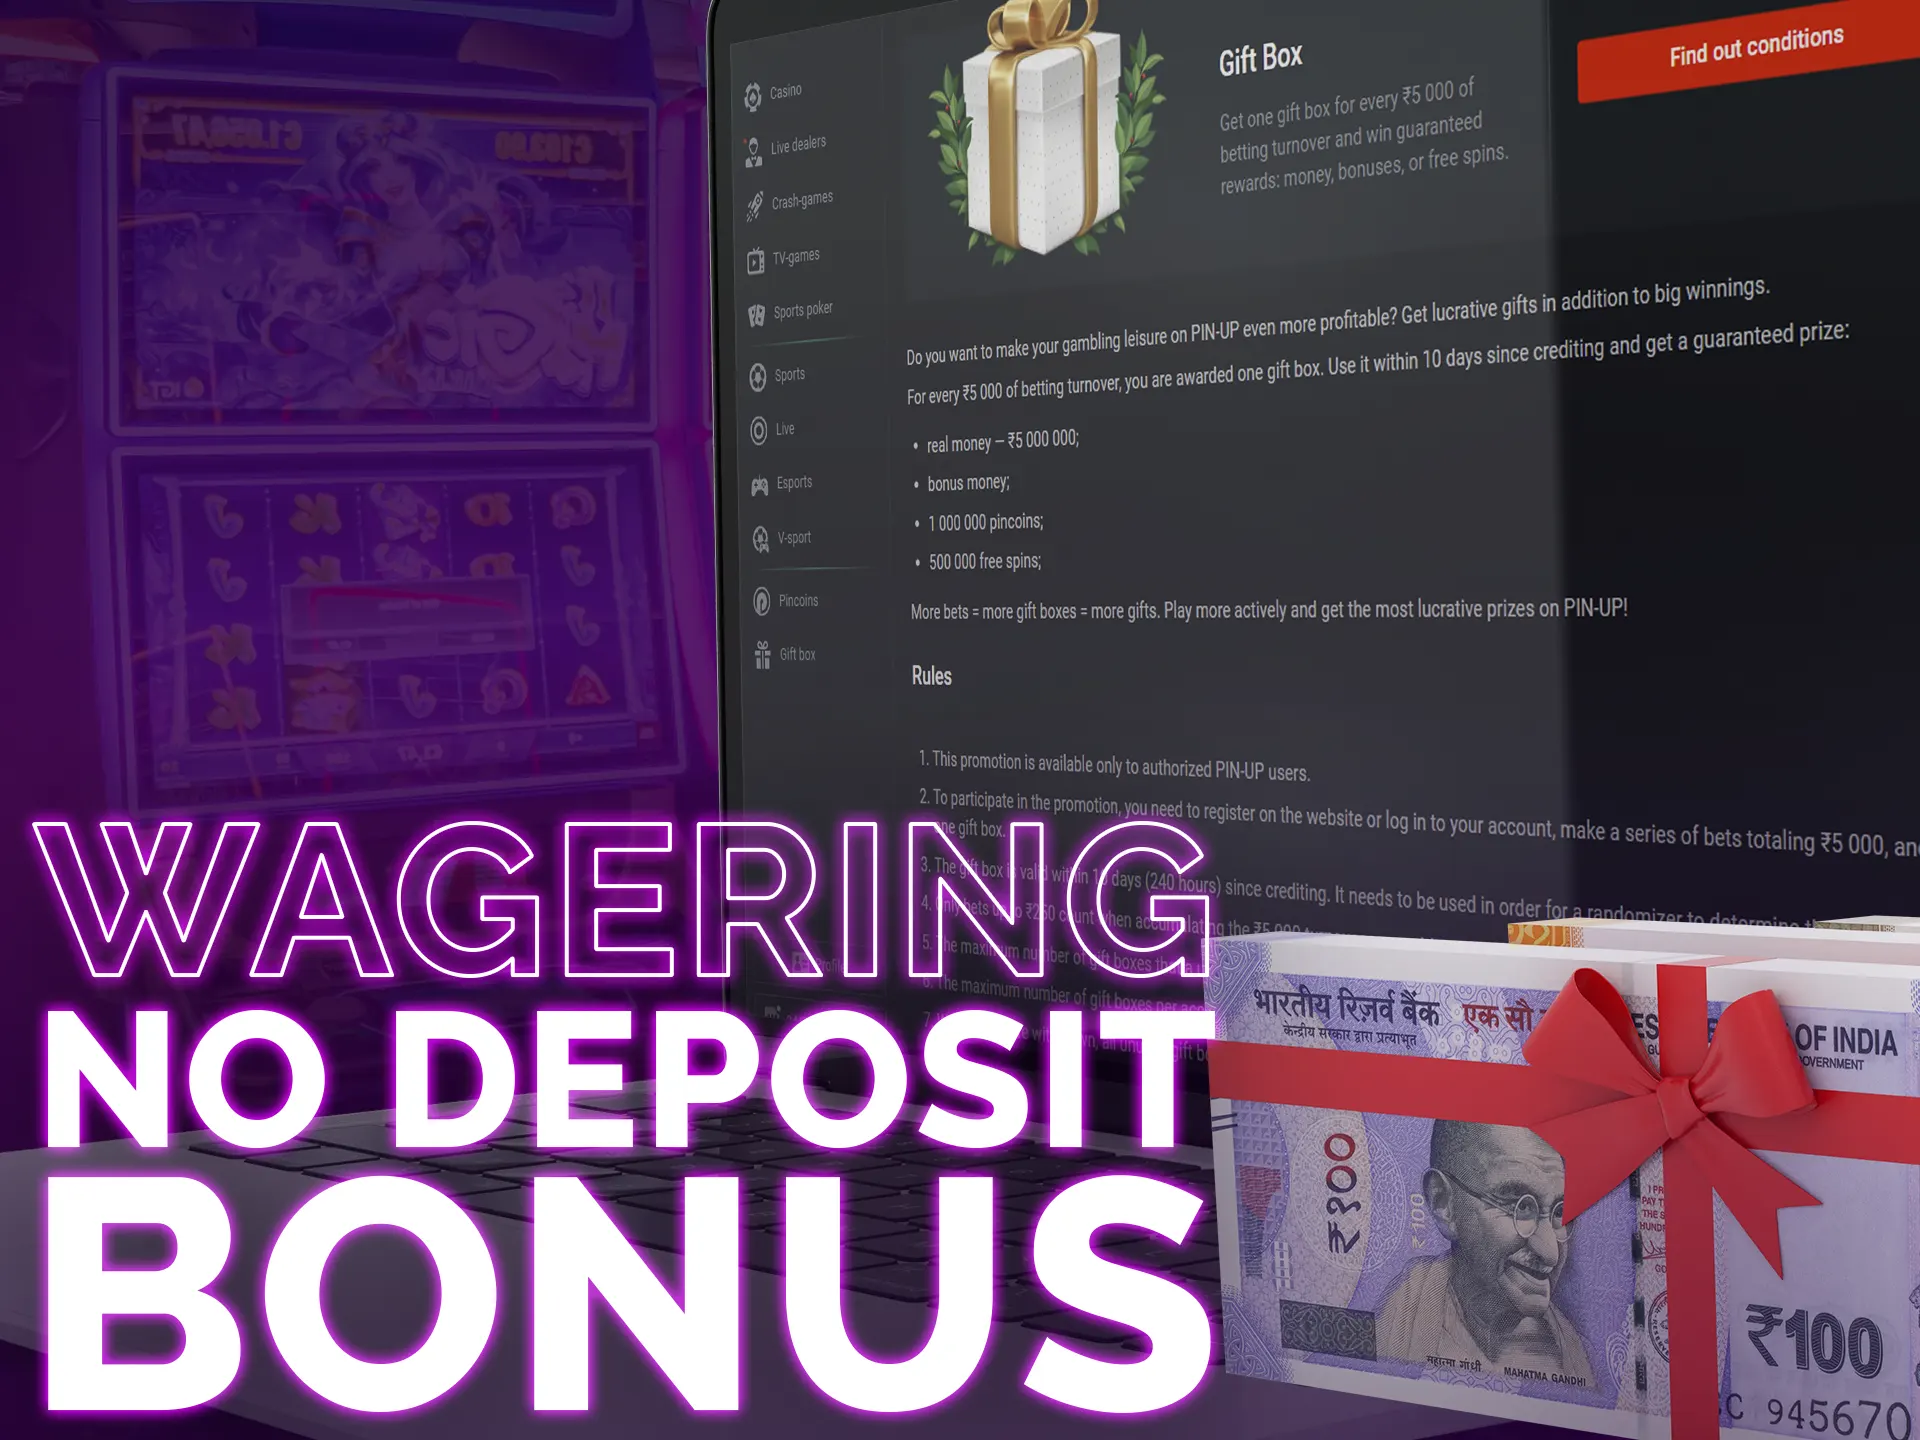 Wagering on no deposit bonuses applies to their amount only.